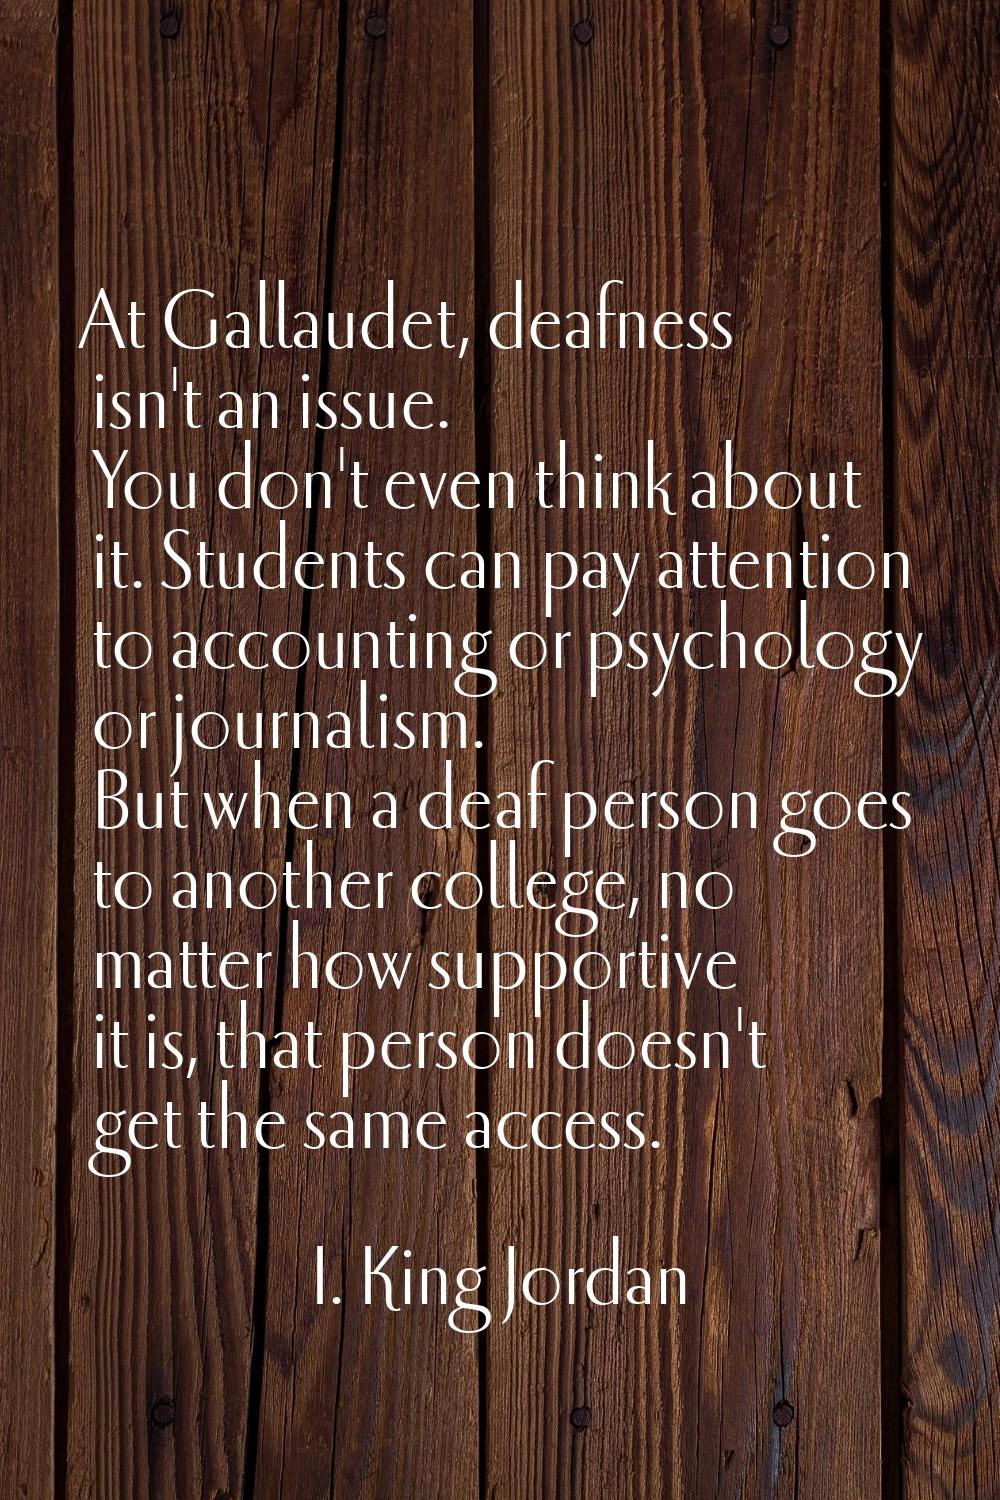 At Gallaudet, deafness isn't an issue. You don't even think about it. Students can pay attention to